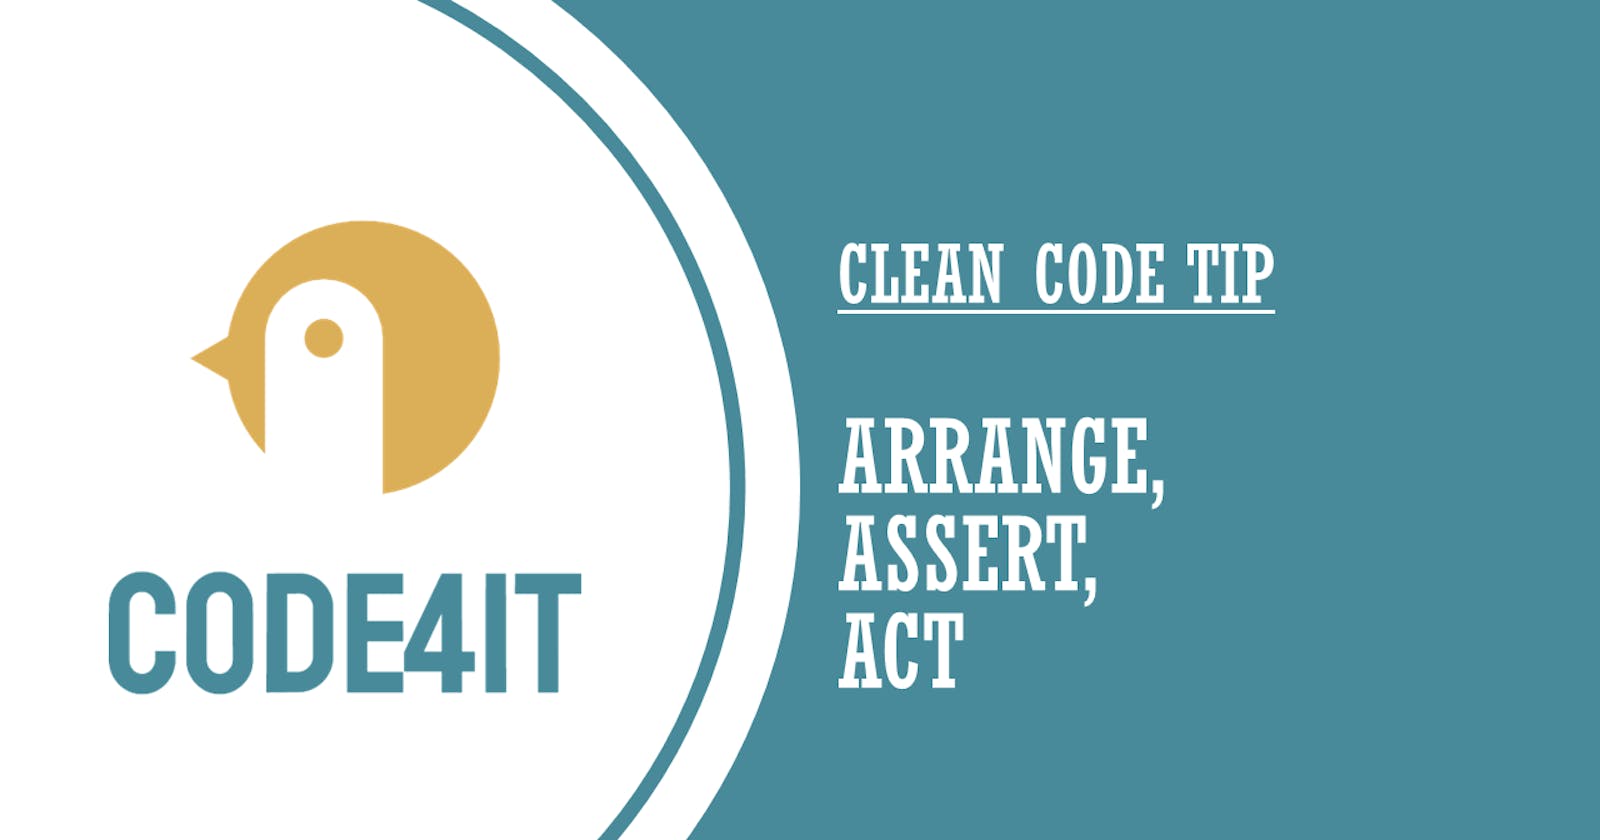 Clean Code Tip: AAA pattern for tests: why is it important?